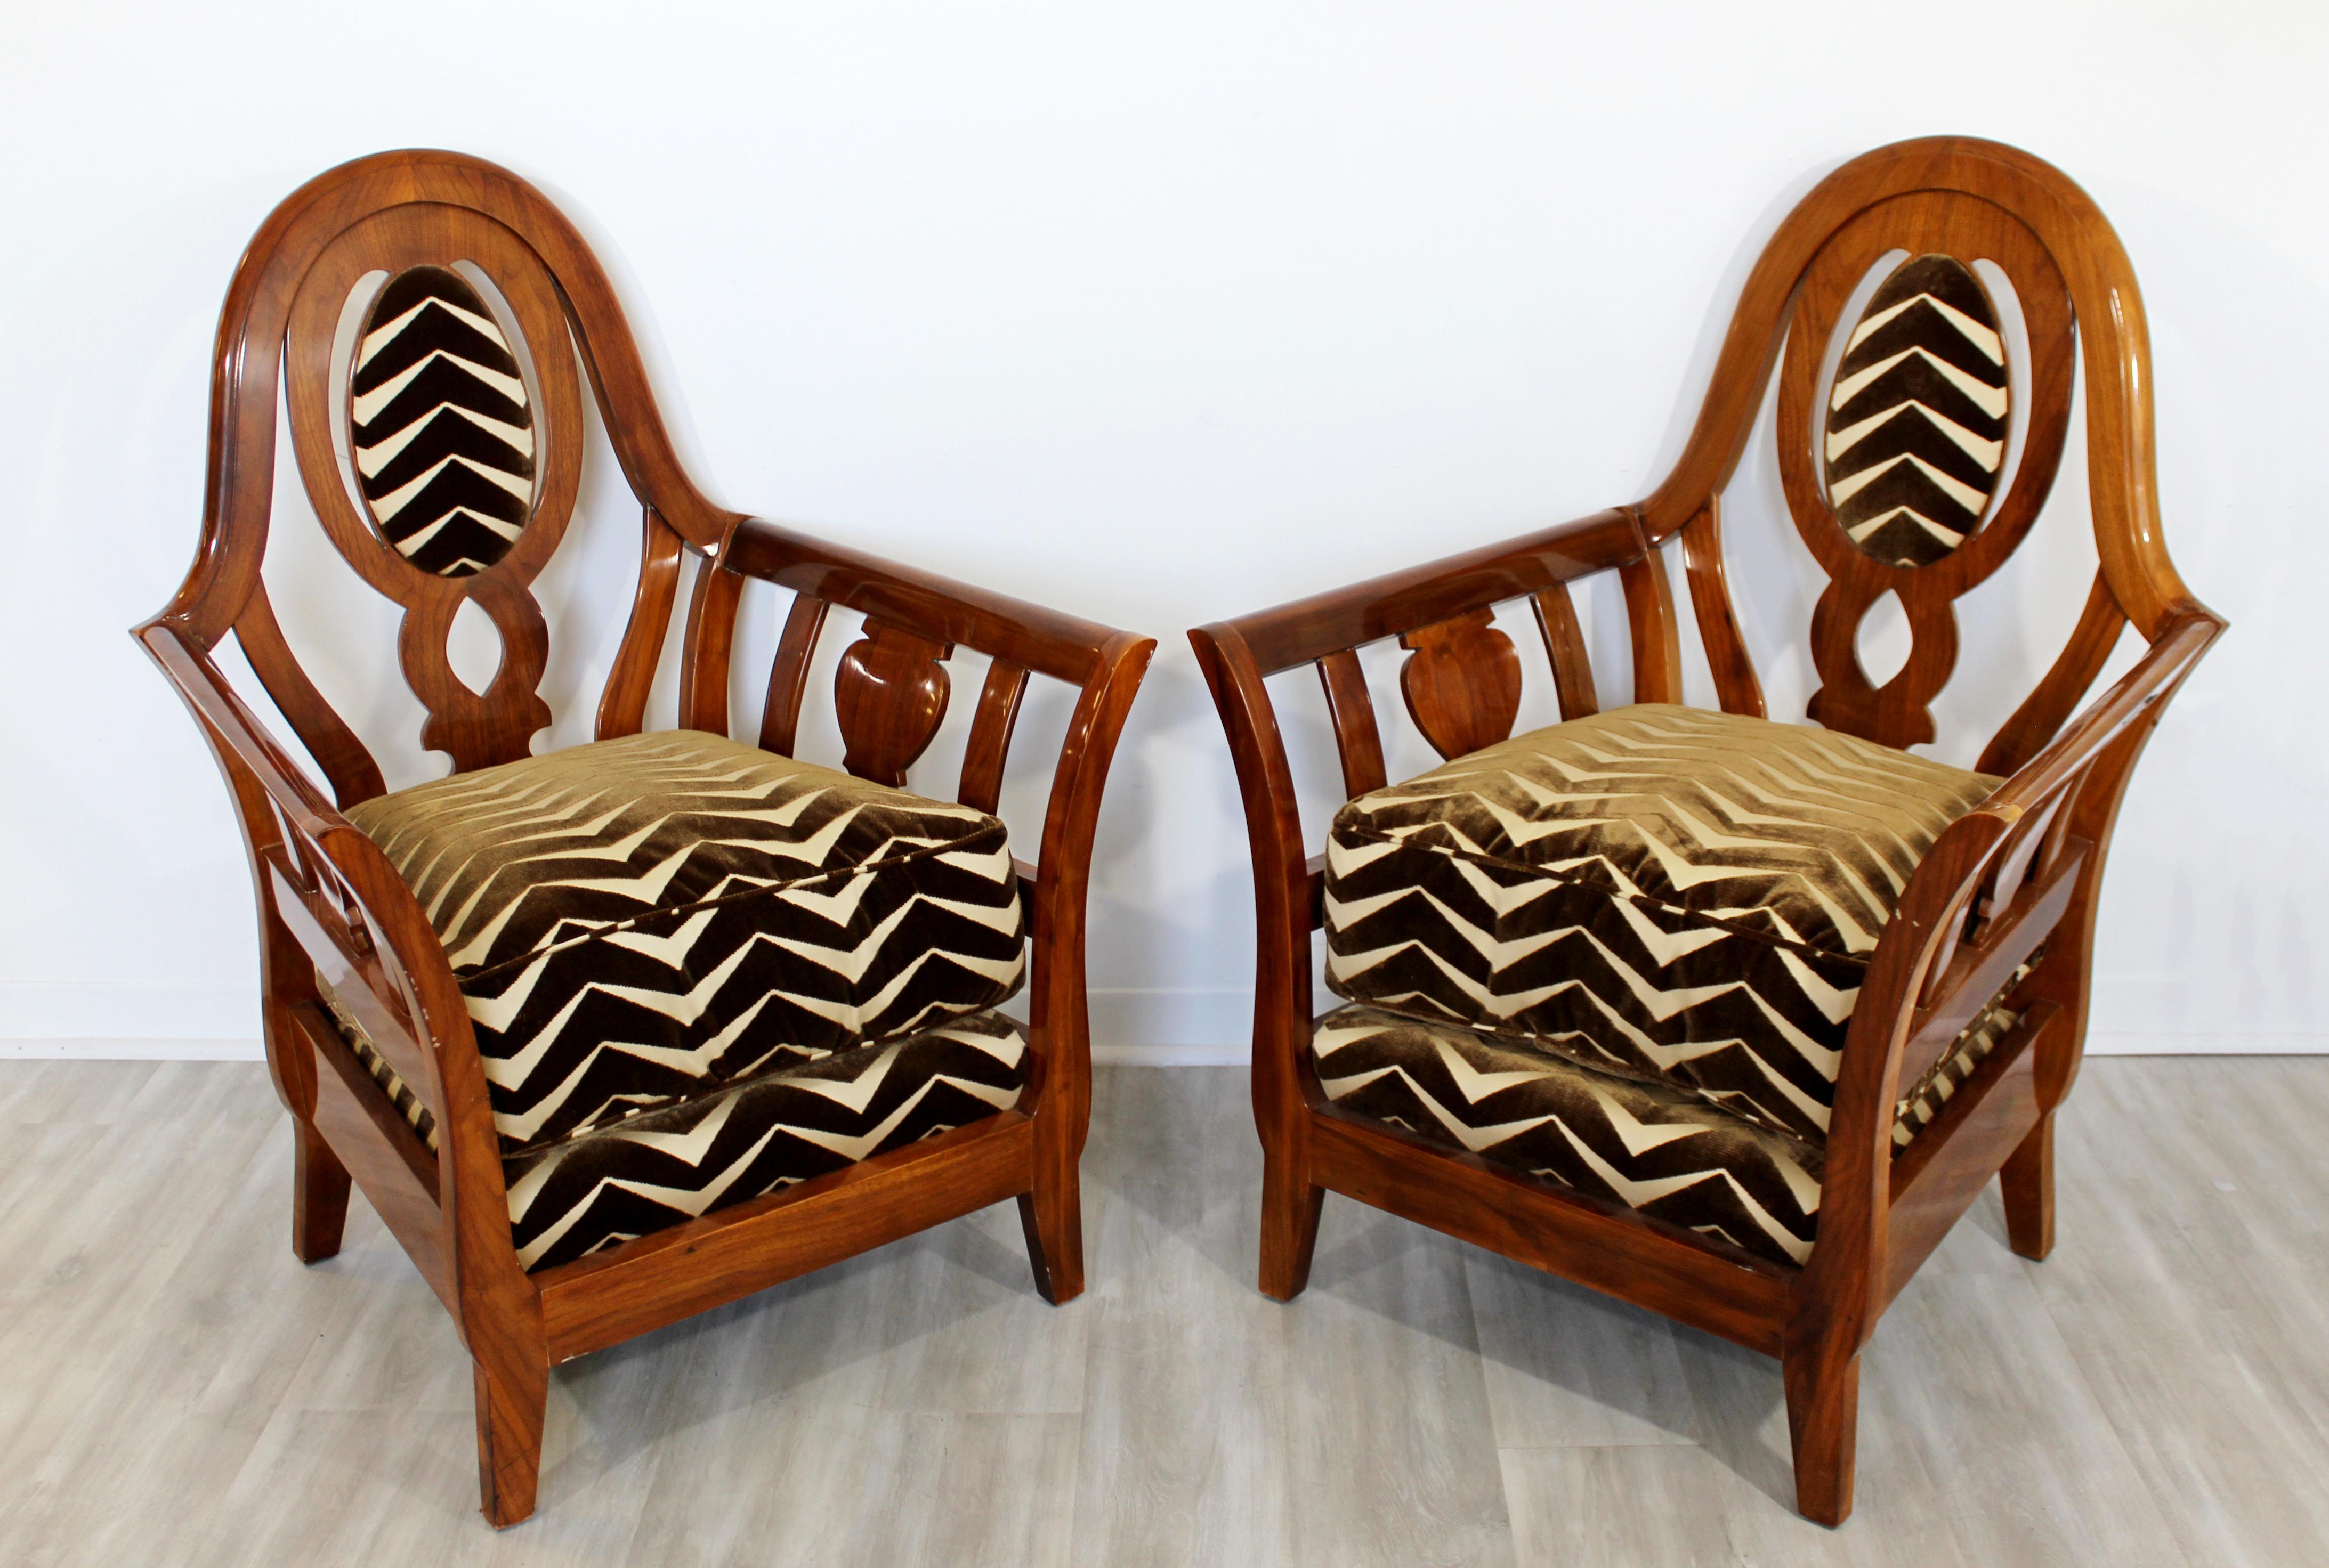 For your consideration is an exceptional pair of Art Deco style lounge armchairs, with a zebra print velvet upholstery on plush seats, on curved lacquered wood bases. In great condition. The dimensions are 32